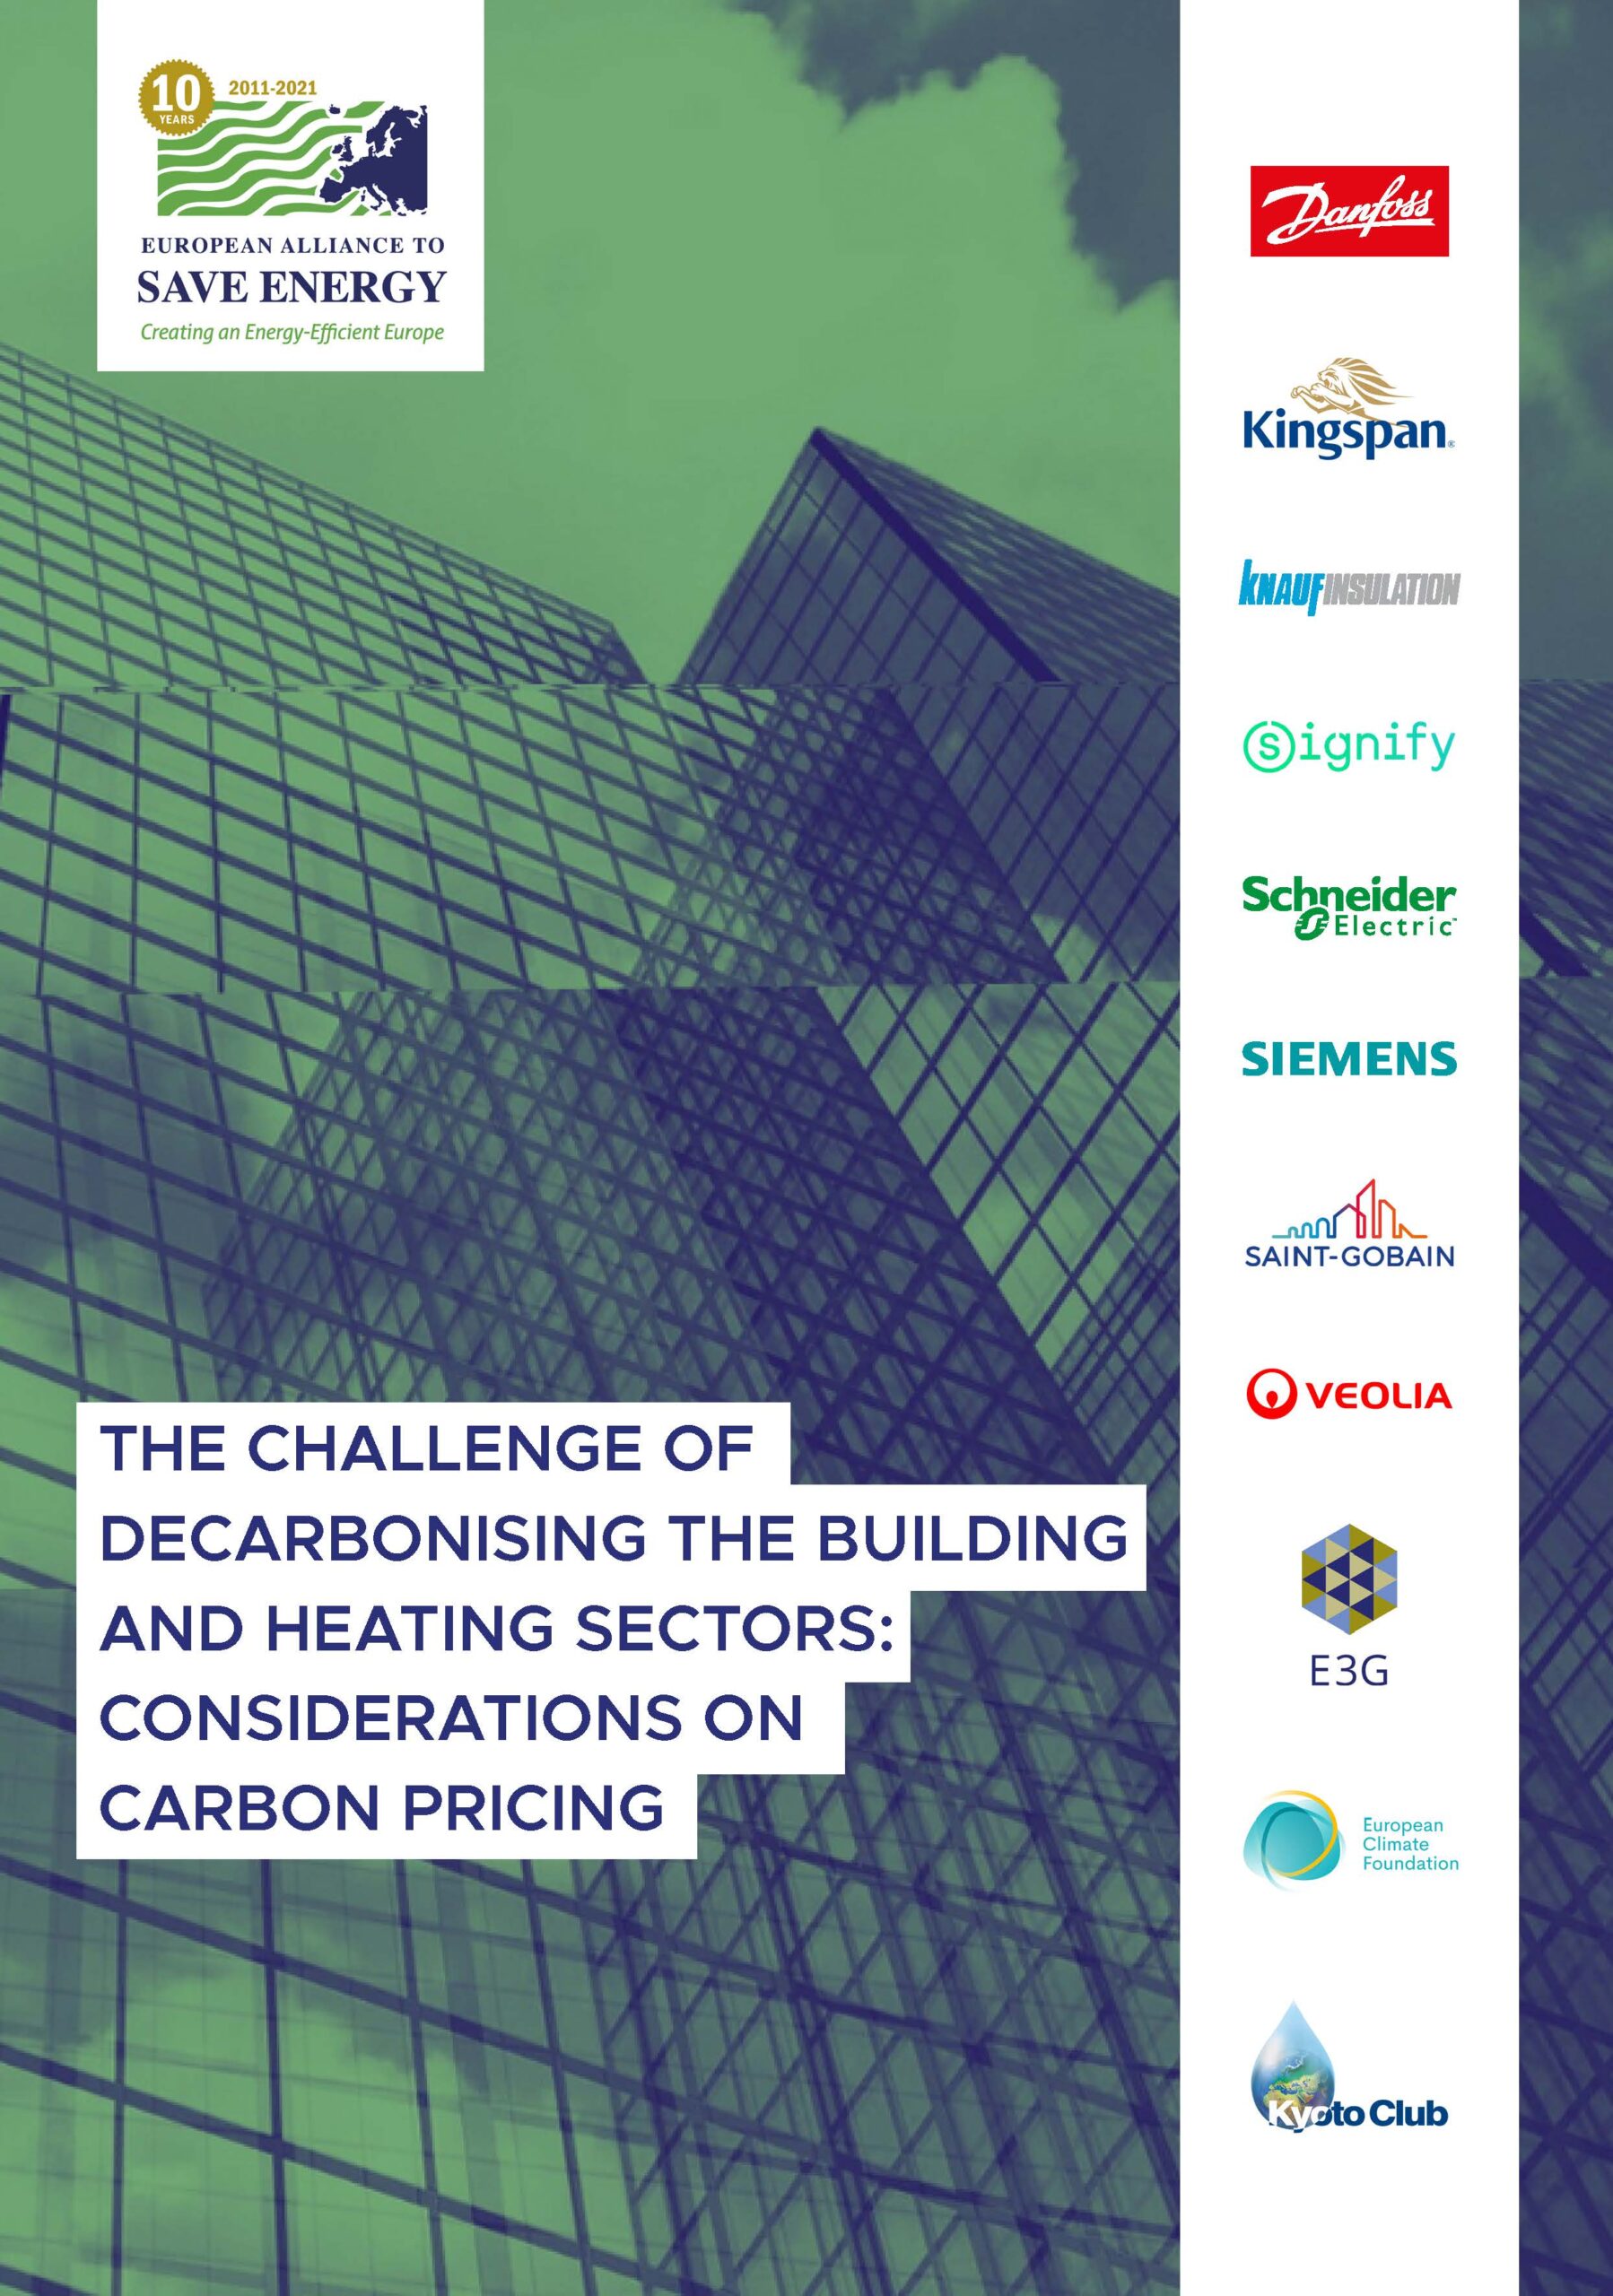 Decarbonising the building and heating sectors: considerations on carbon pricing